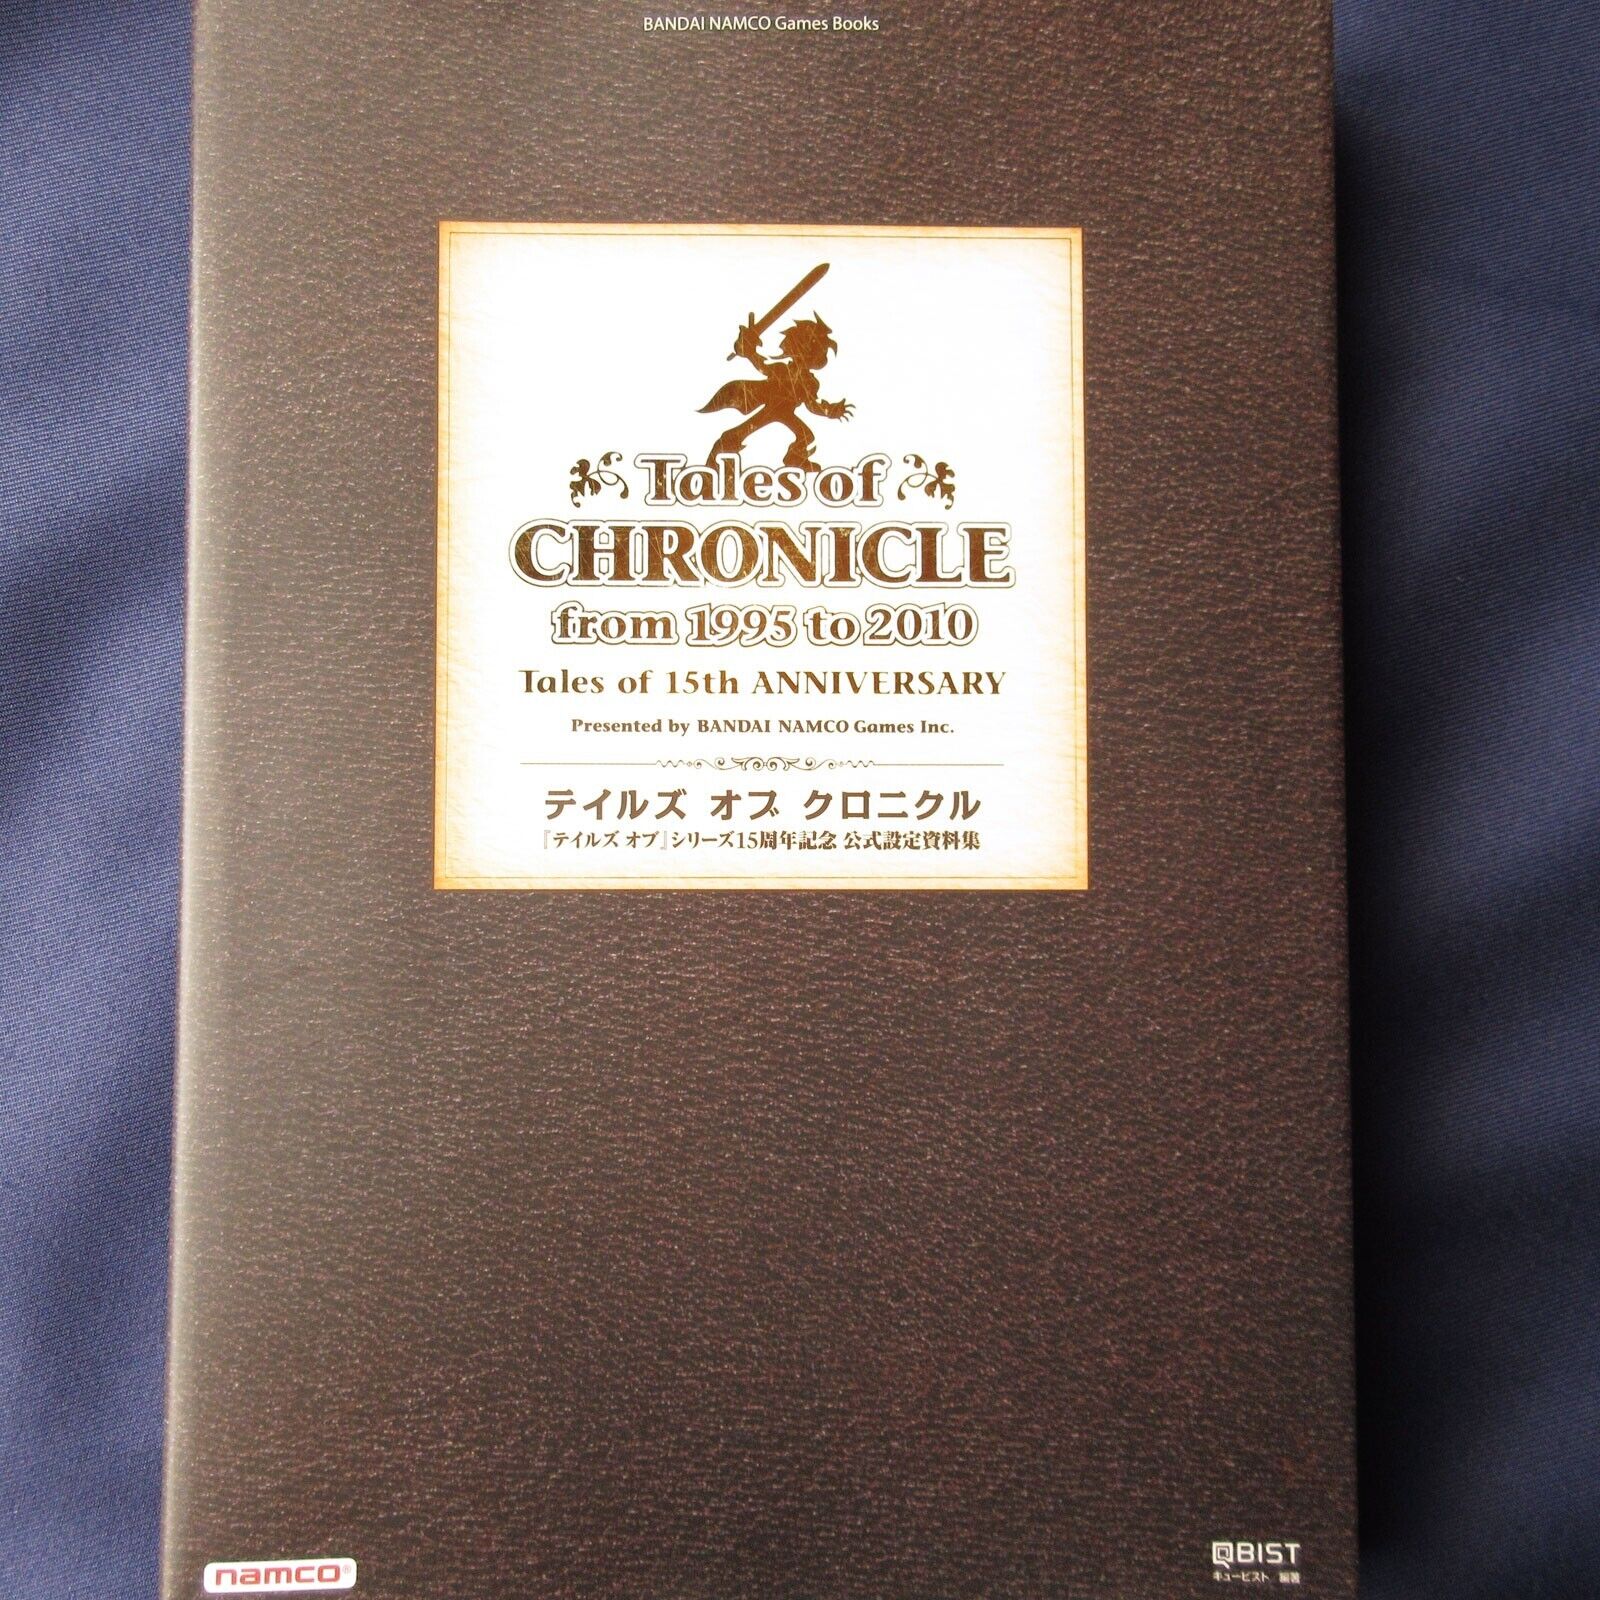 Tales of CHRONICLE from 1995-2010 Tales of 15th Anniversary | JAPAN Game